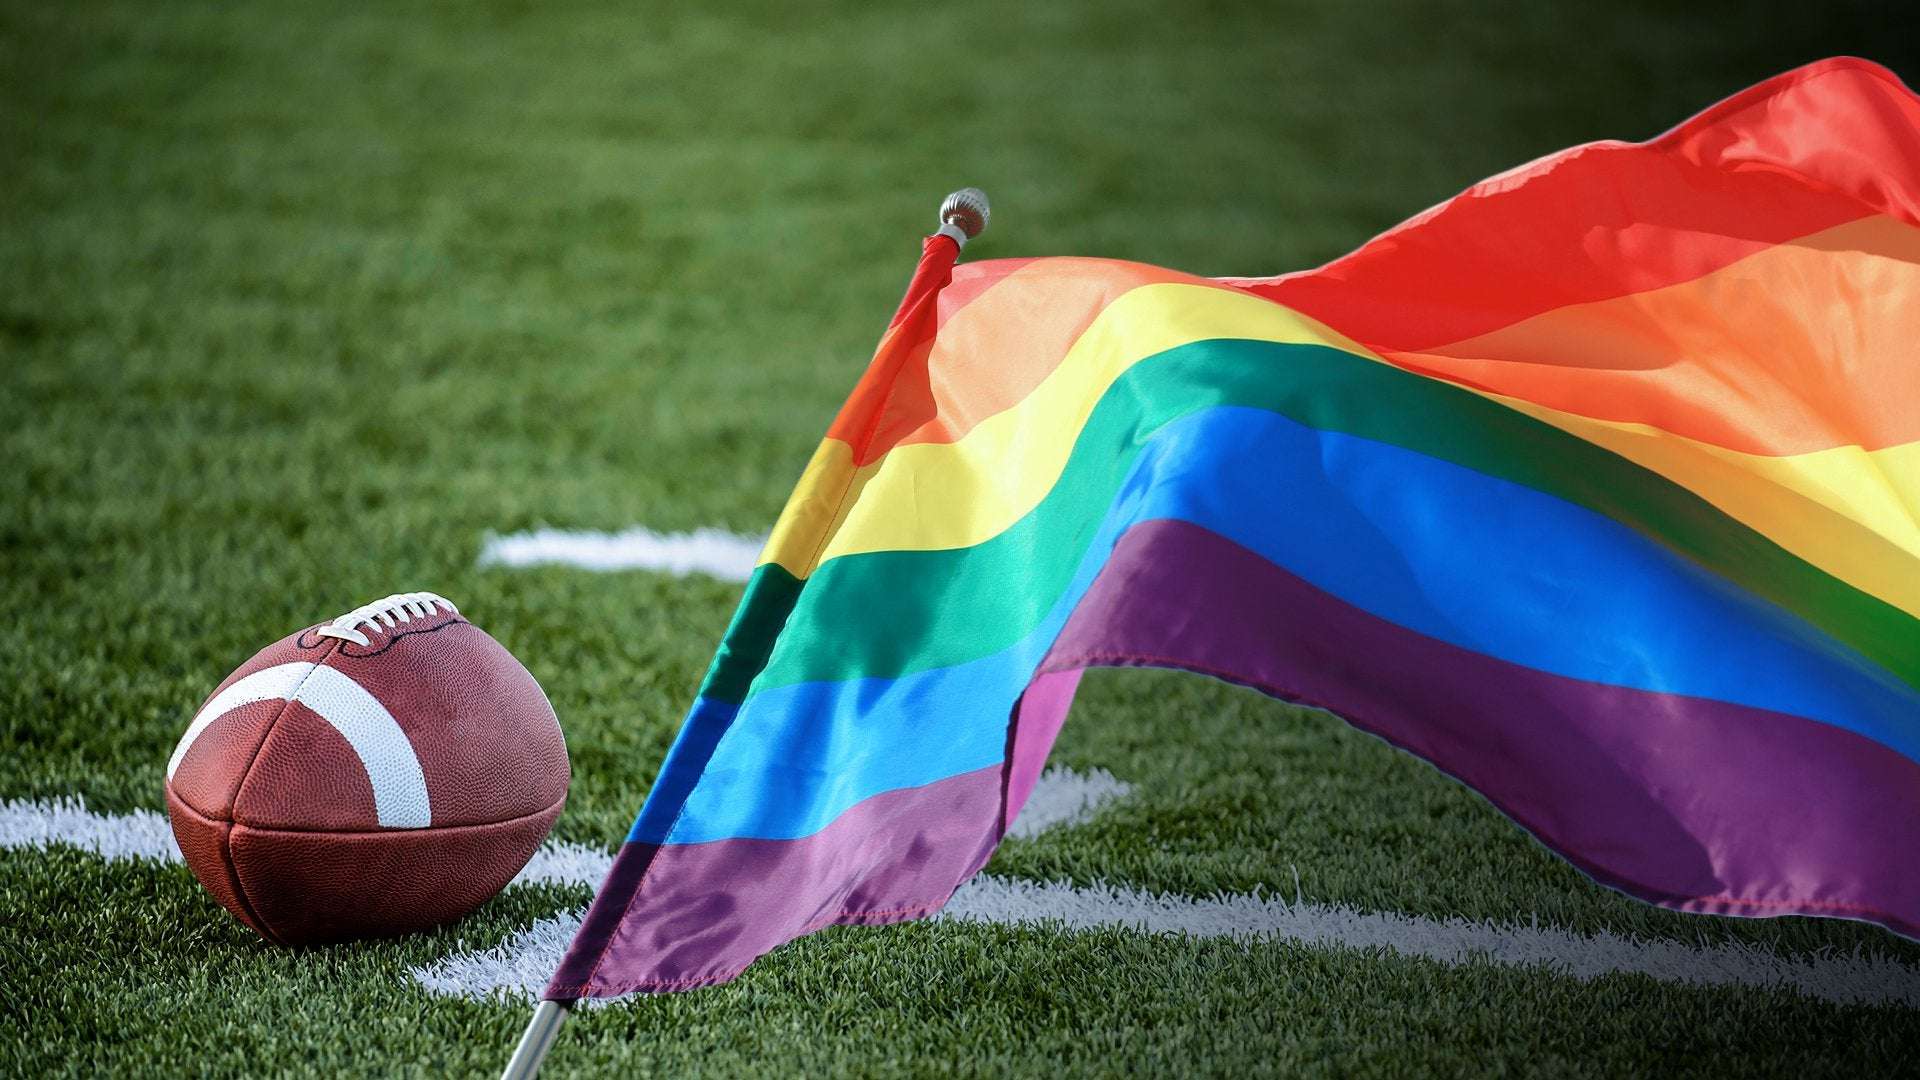 image for 'Hateful and Intolerant': UMass to Hold 'Pride Day' While Hosting Liberty University Football Team